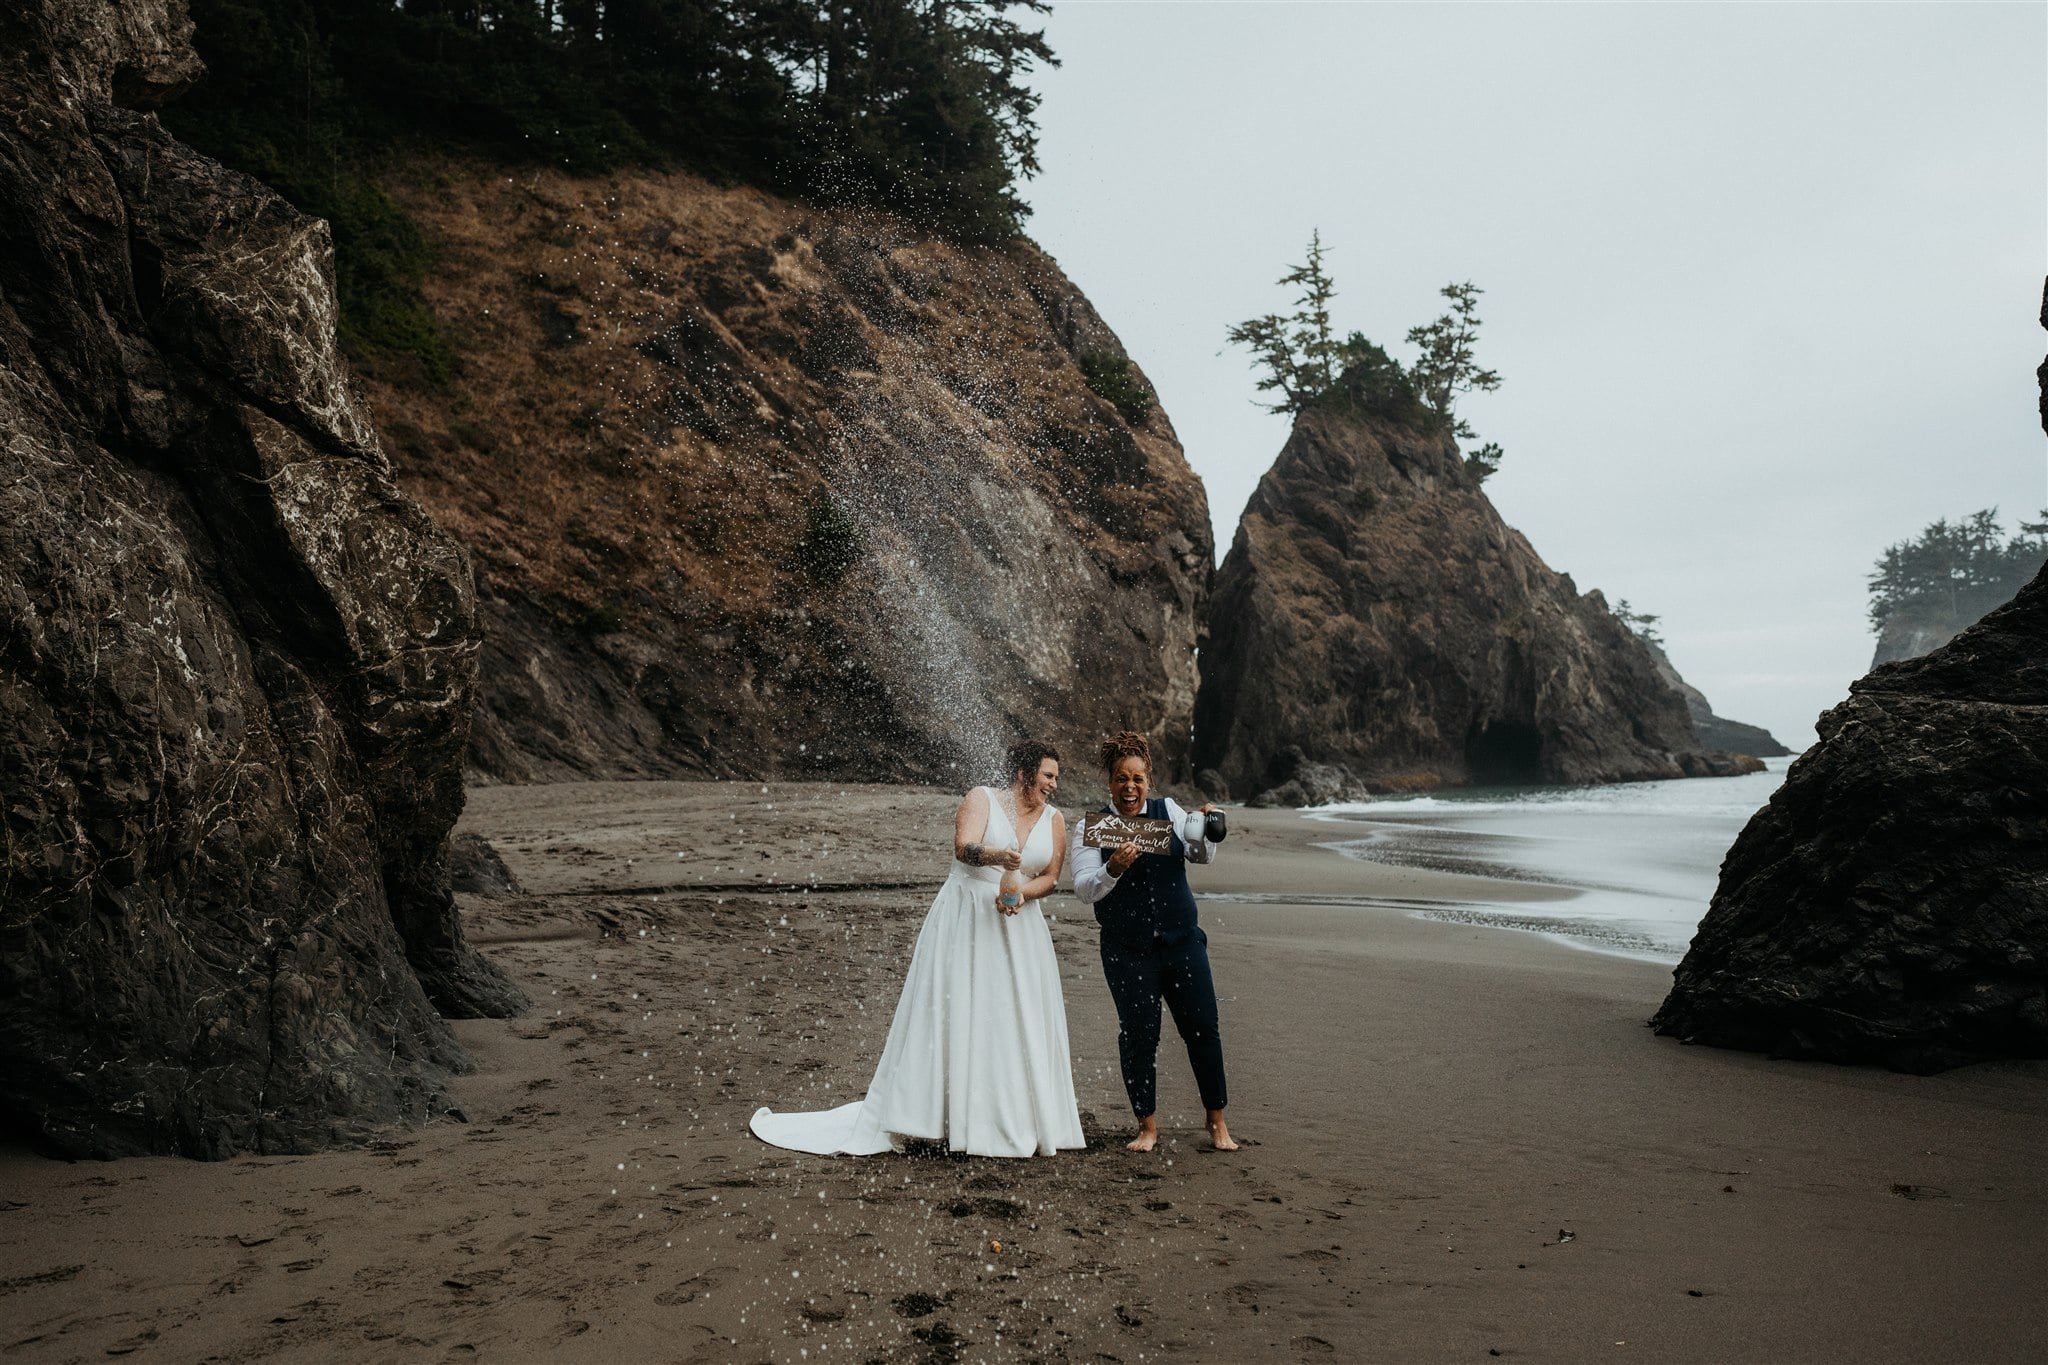 Brides spray champagne on the beach during their Southern Oregon Coast elopement